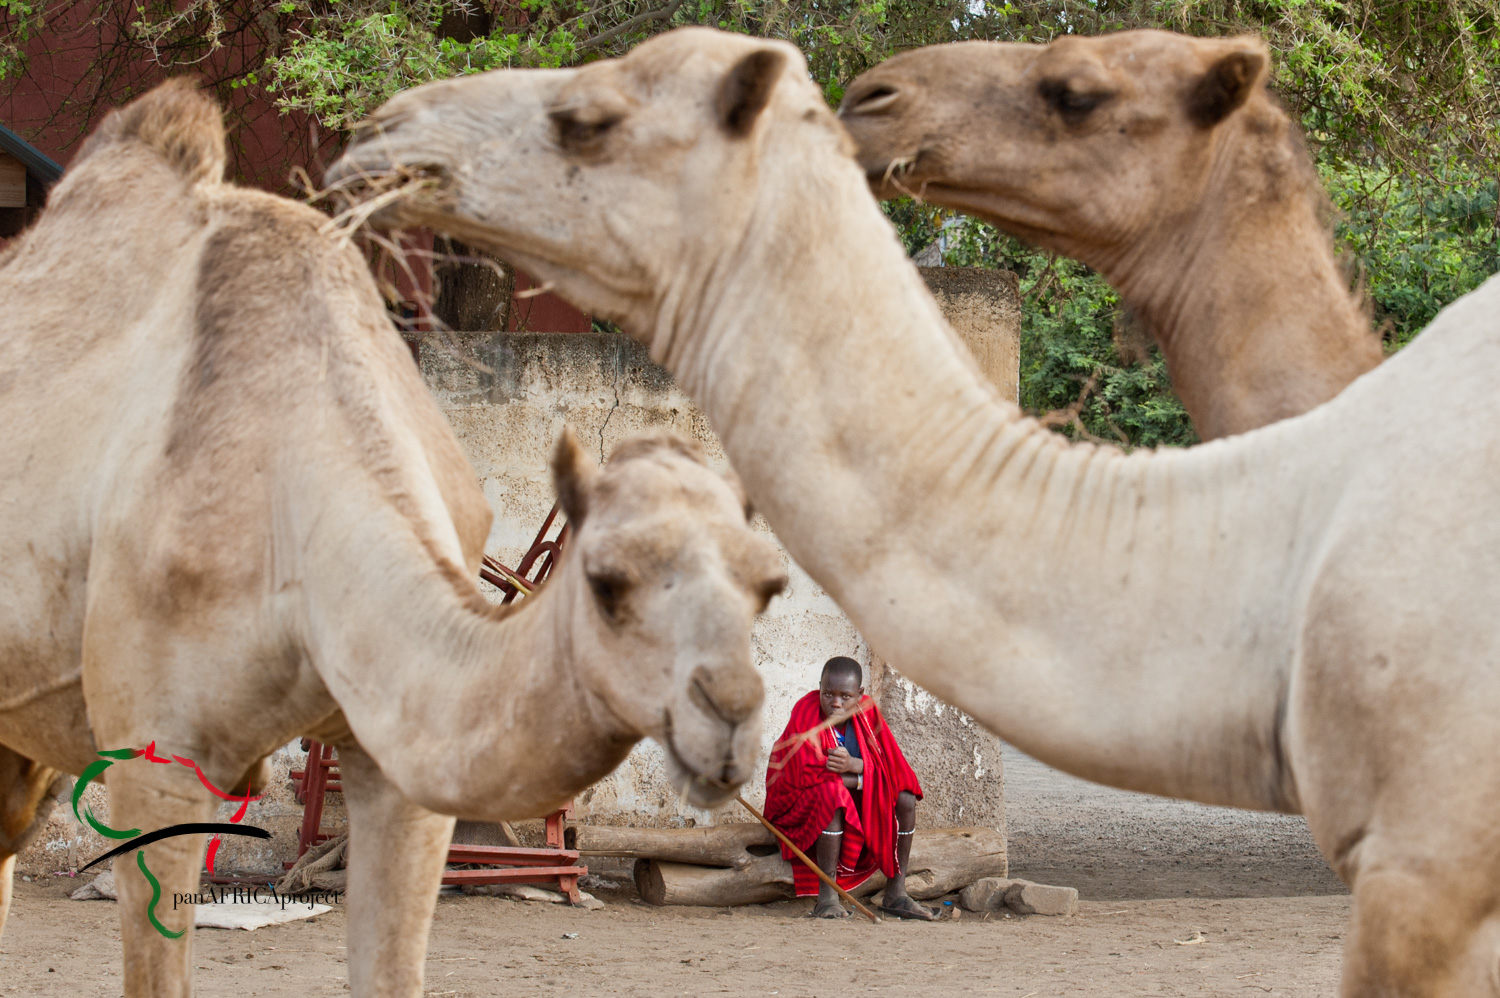 A man sitting behind camels